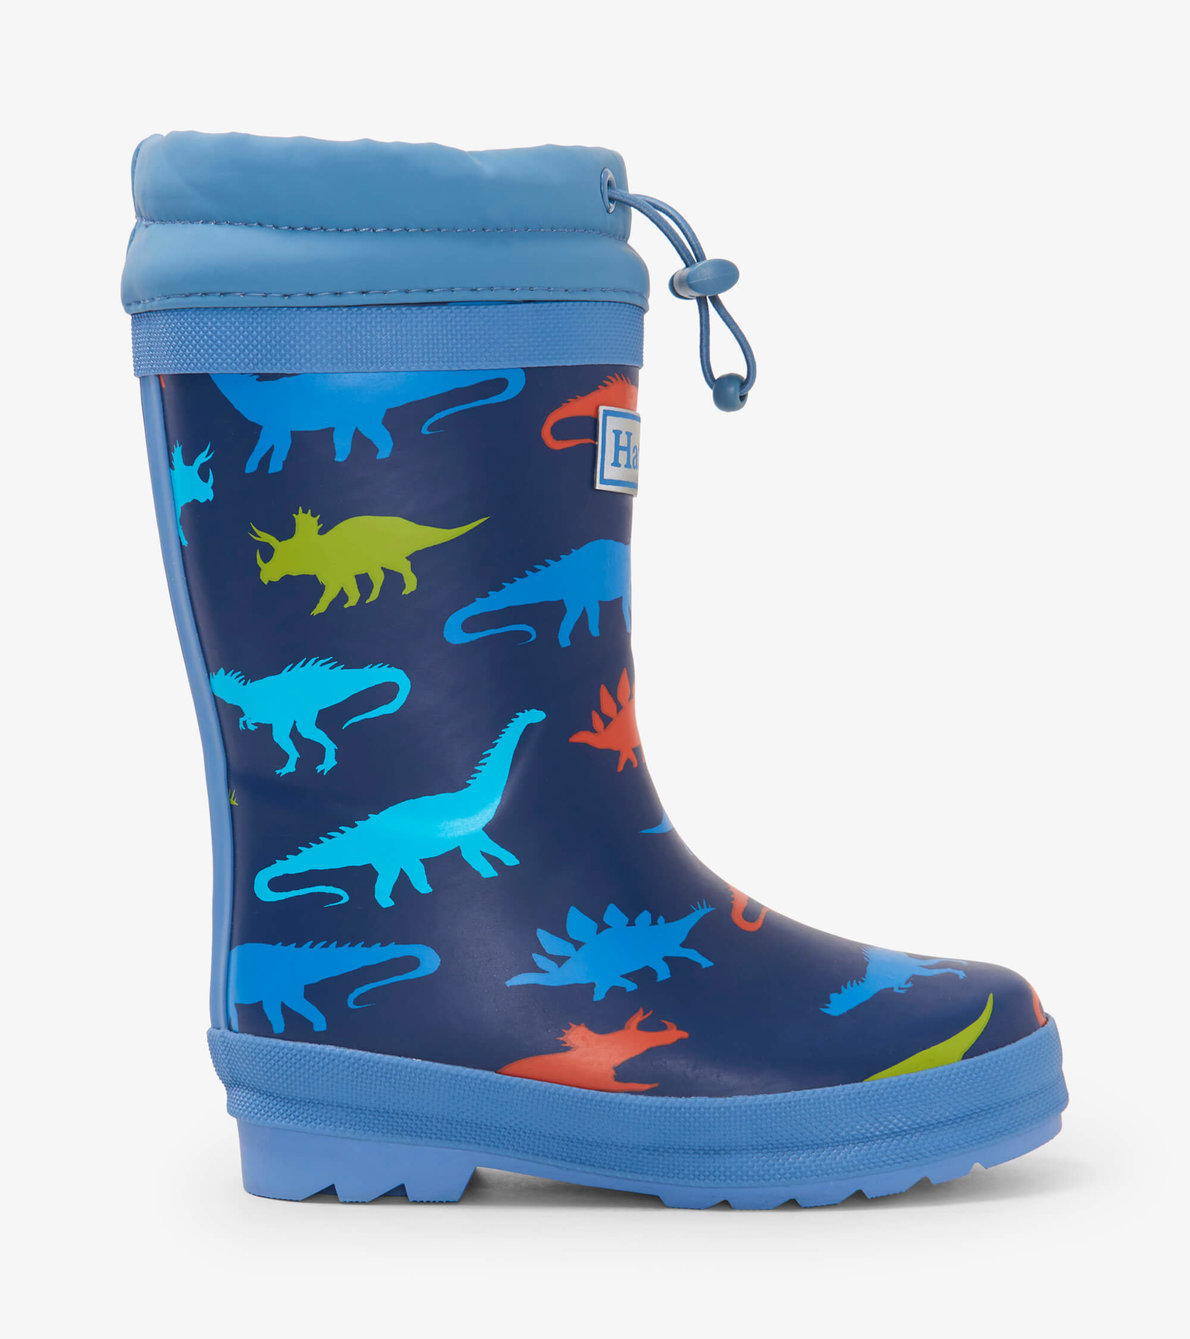 View larger image of Dinosaur Silhouettes Sherpa Lined Kids Wellies